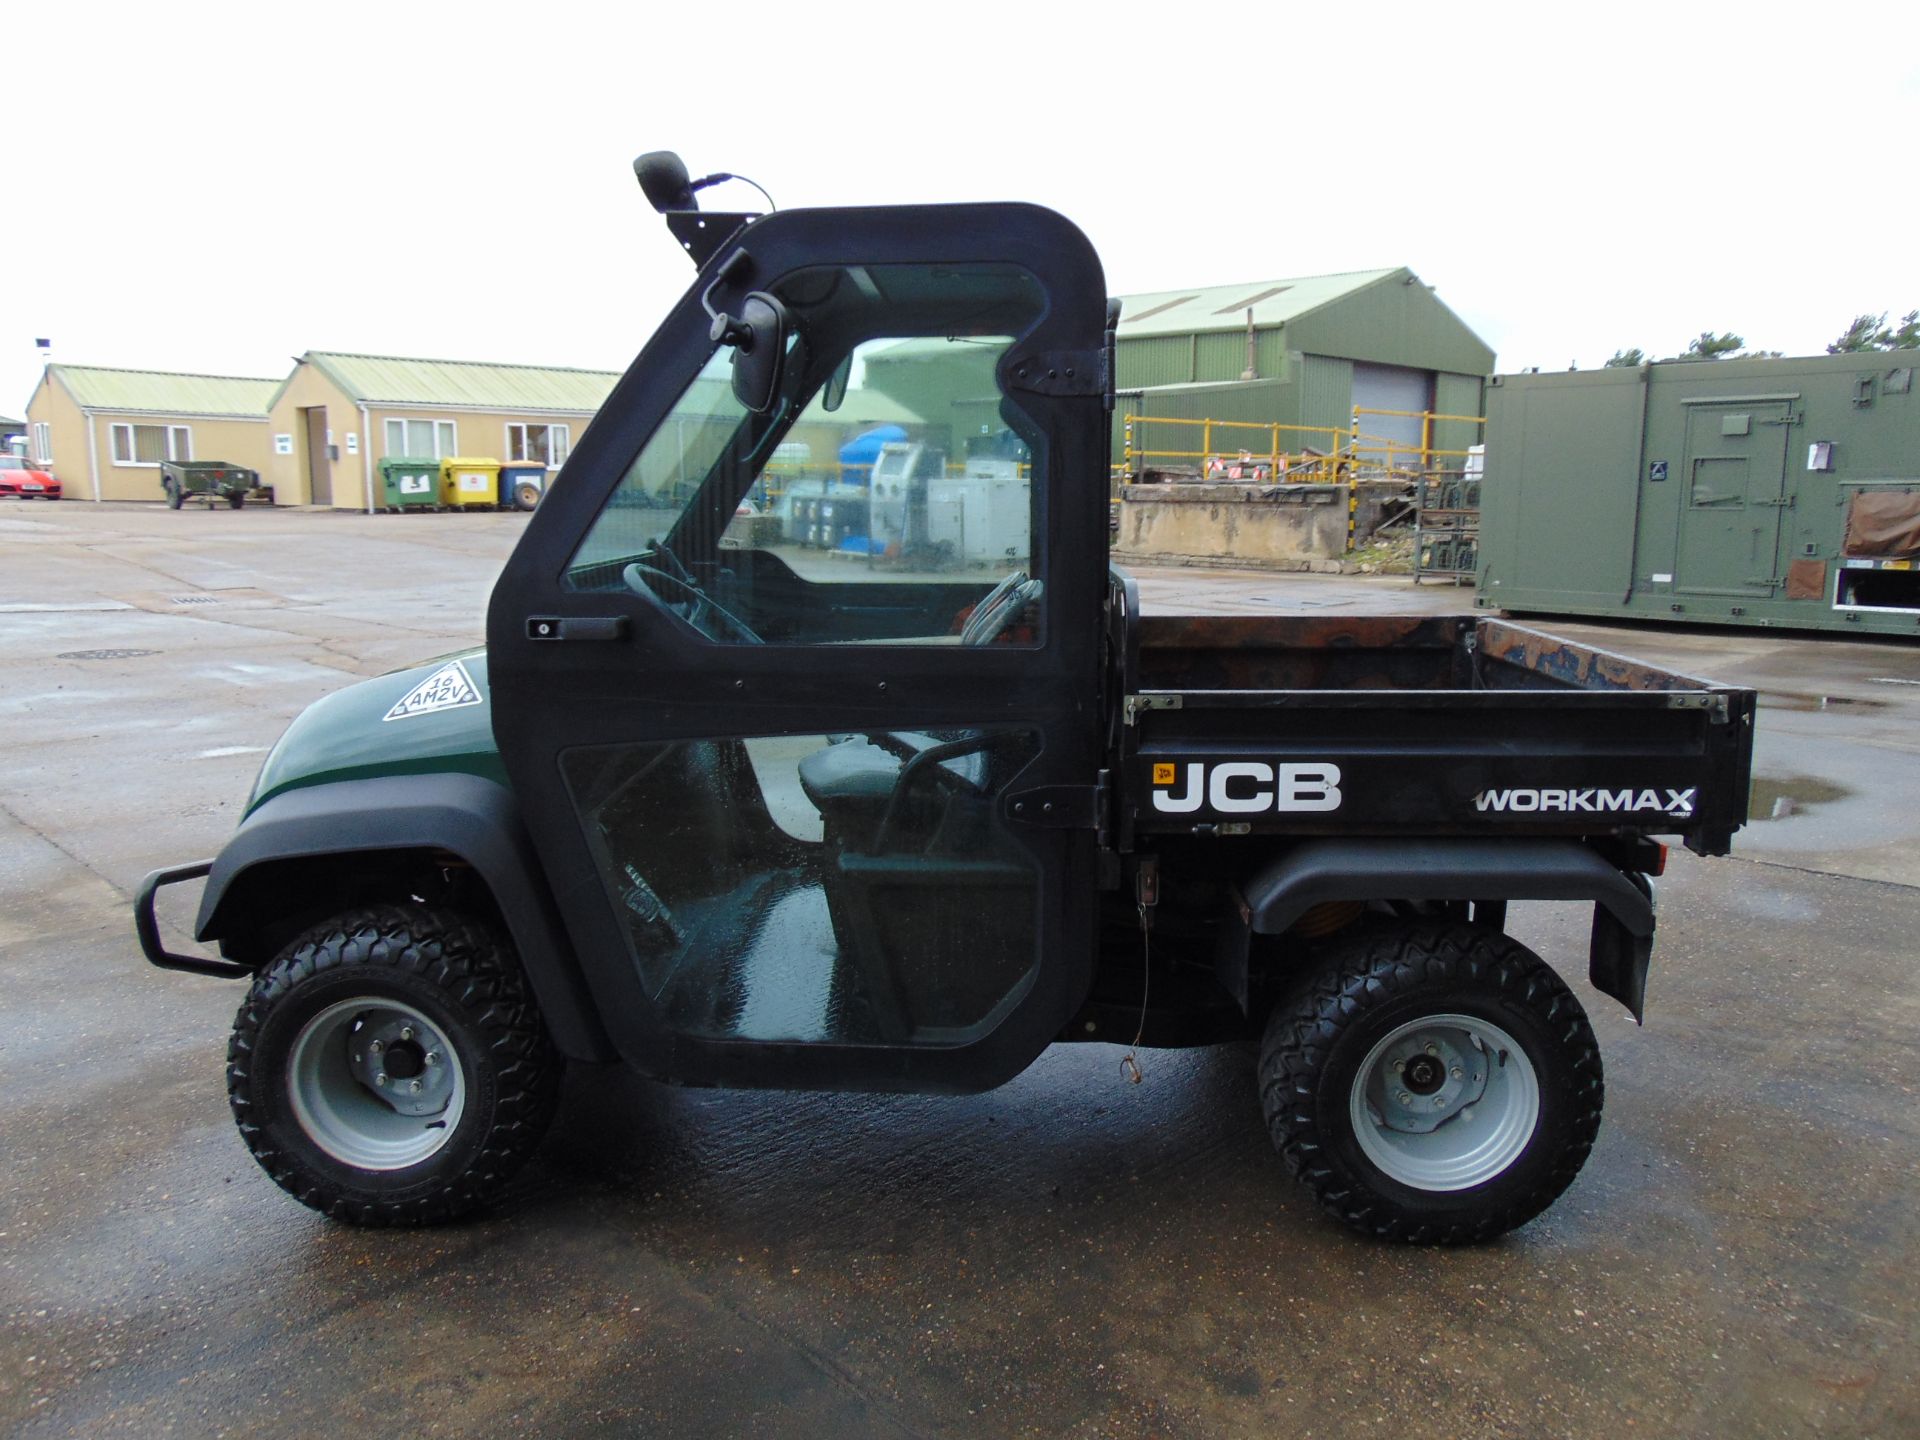 2015 JCB Workmax 1000D 4WD Diesel Utility Vehicle UTV ONLY 746 HOURS! - Image 4 of 15